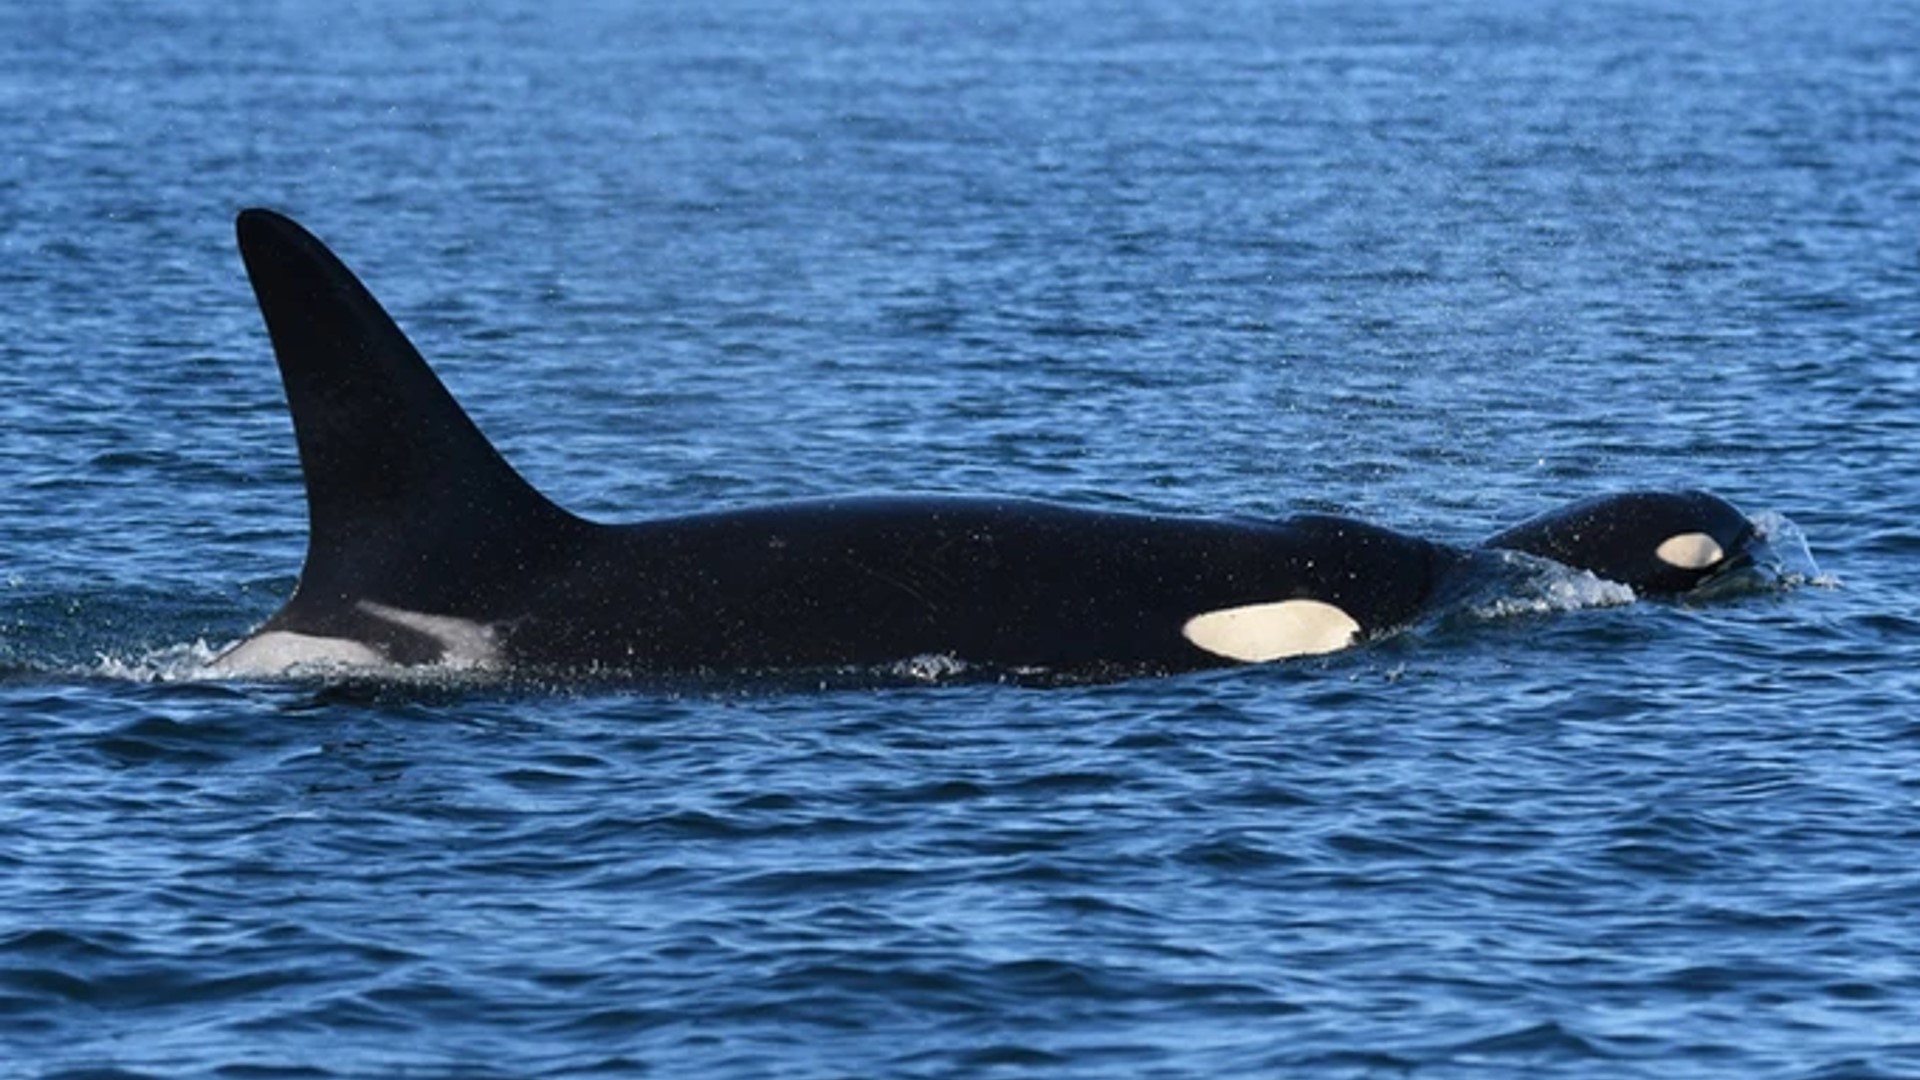 The encounters between "killer whales" and boats have been increasing since 2020.